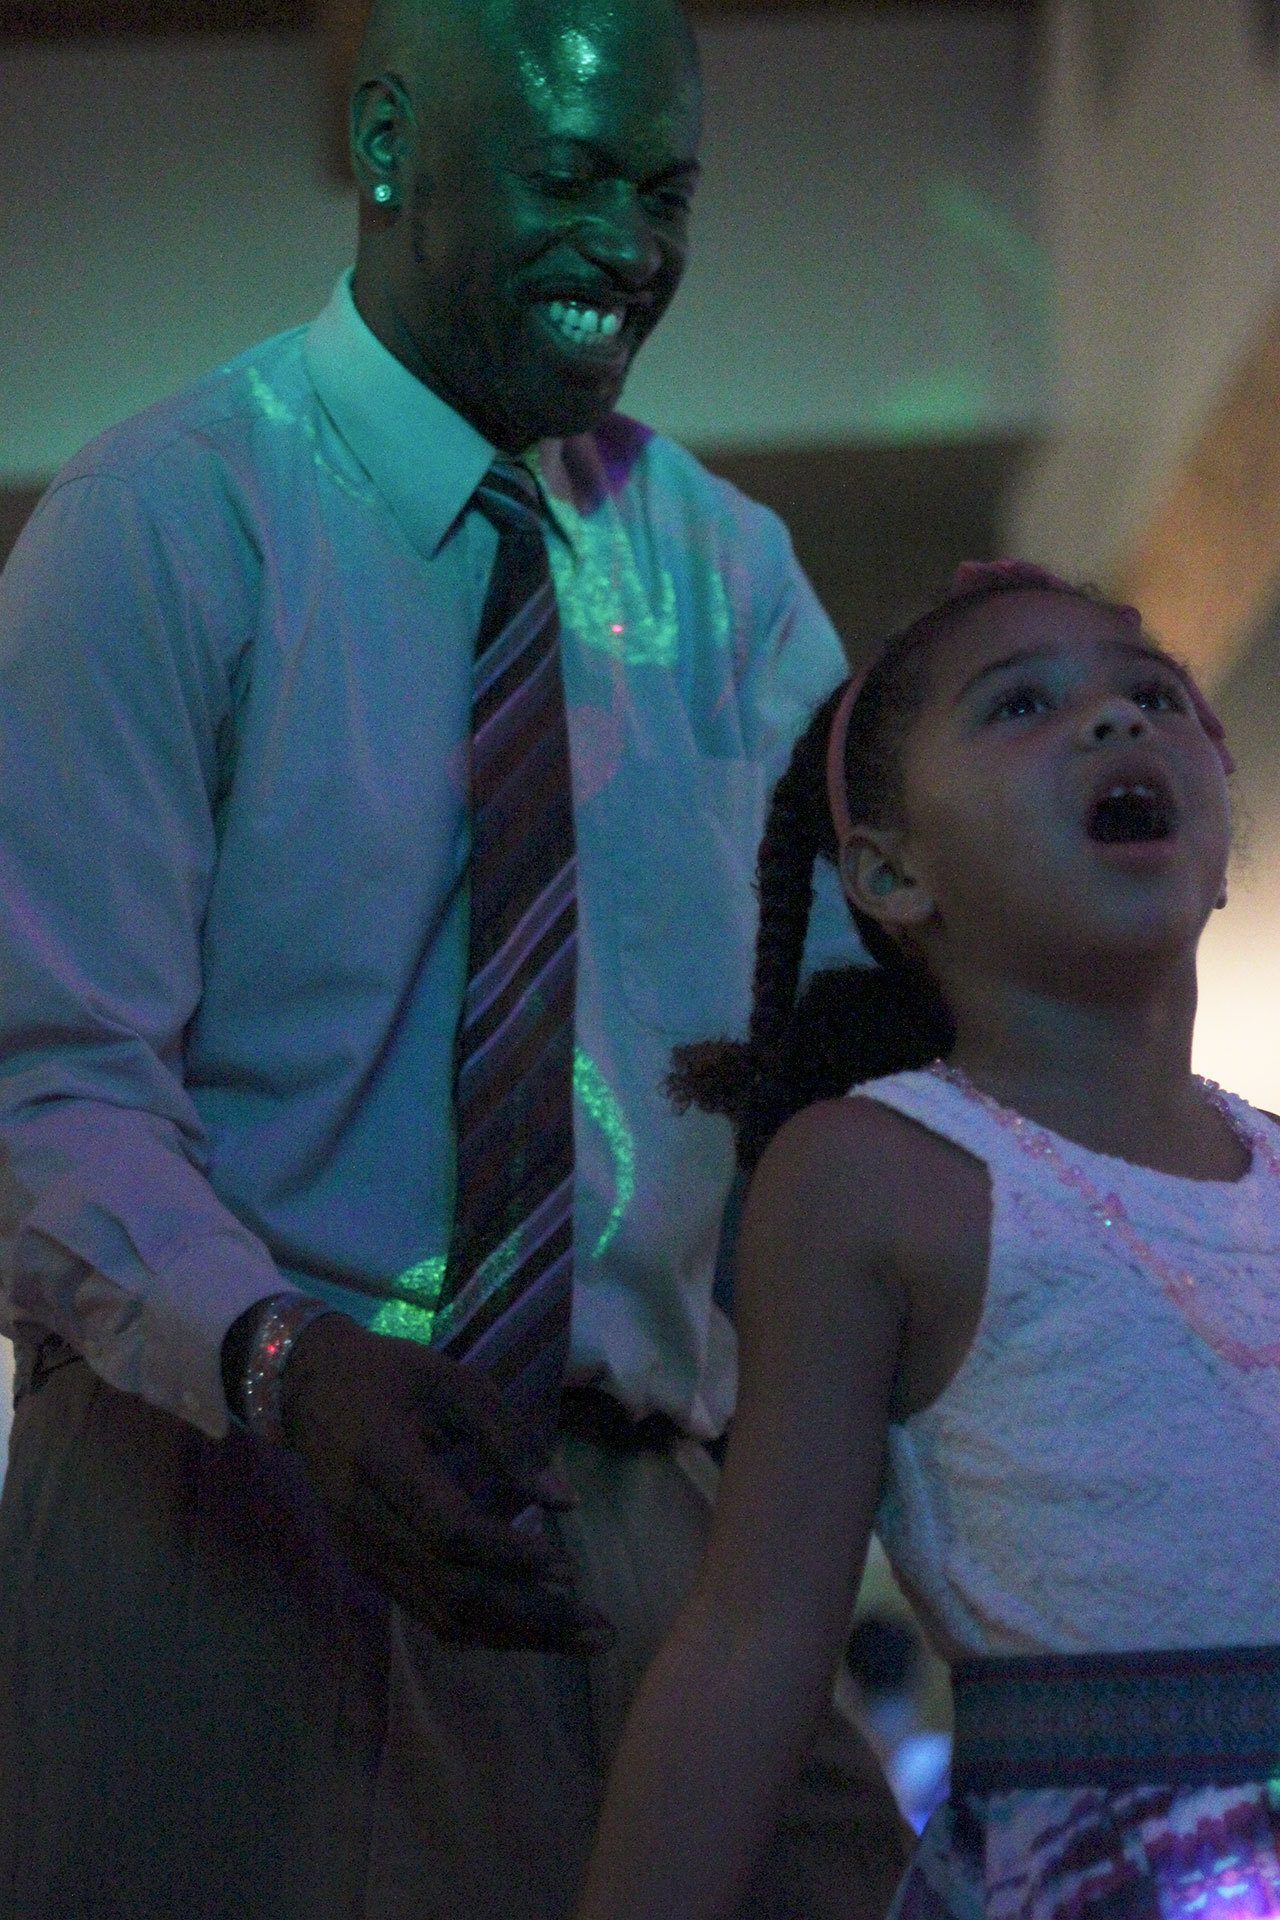 Dads and daughters celebrate an early Valentine’s Day at dance | GALLERY